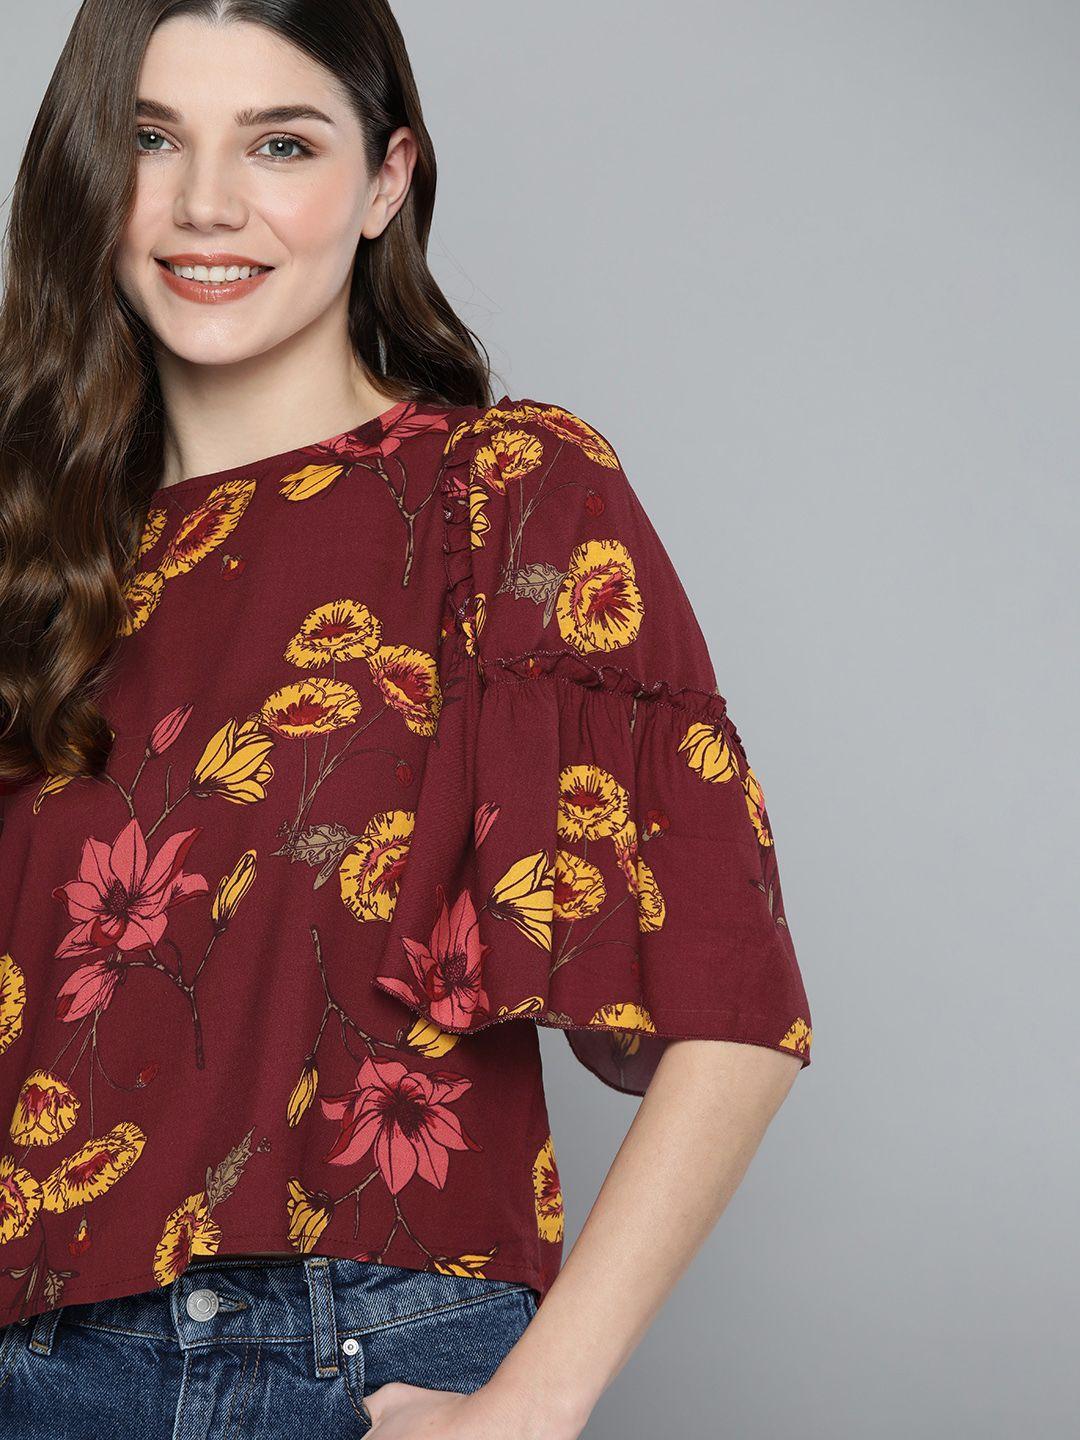 mast & harbour maroon & mustard yellow floral print top